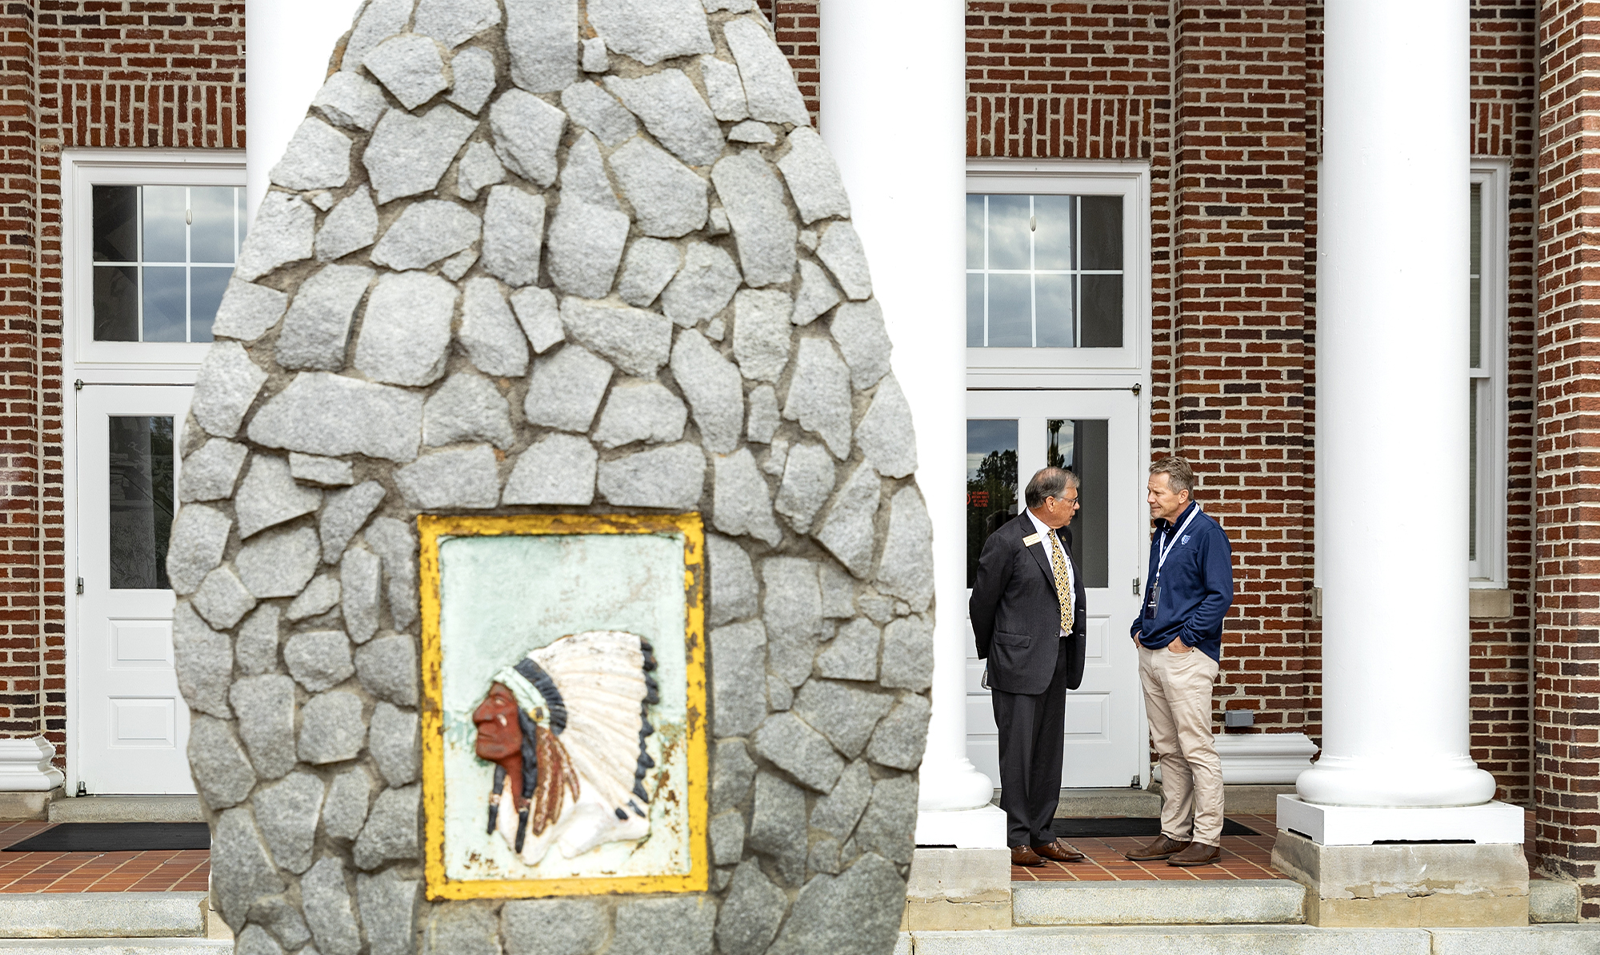 Two men chatting outside of a building in the background. In the foreground is a painting of an American Indian atop a stone sculpture.